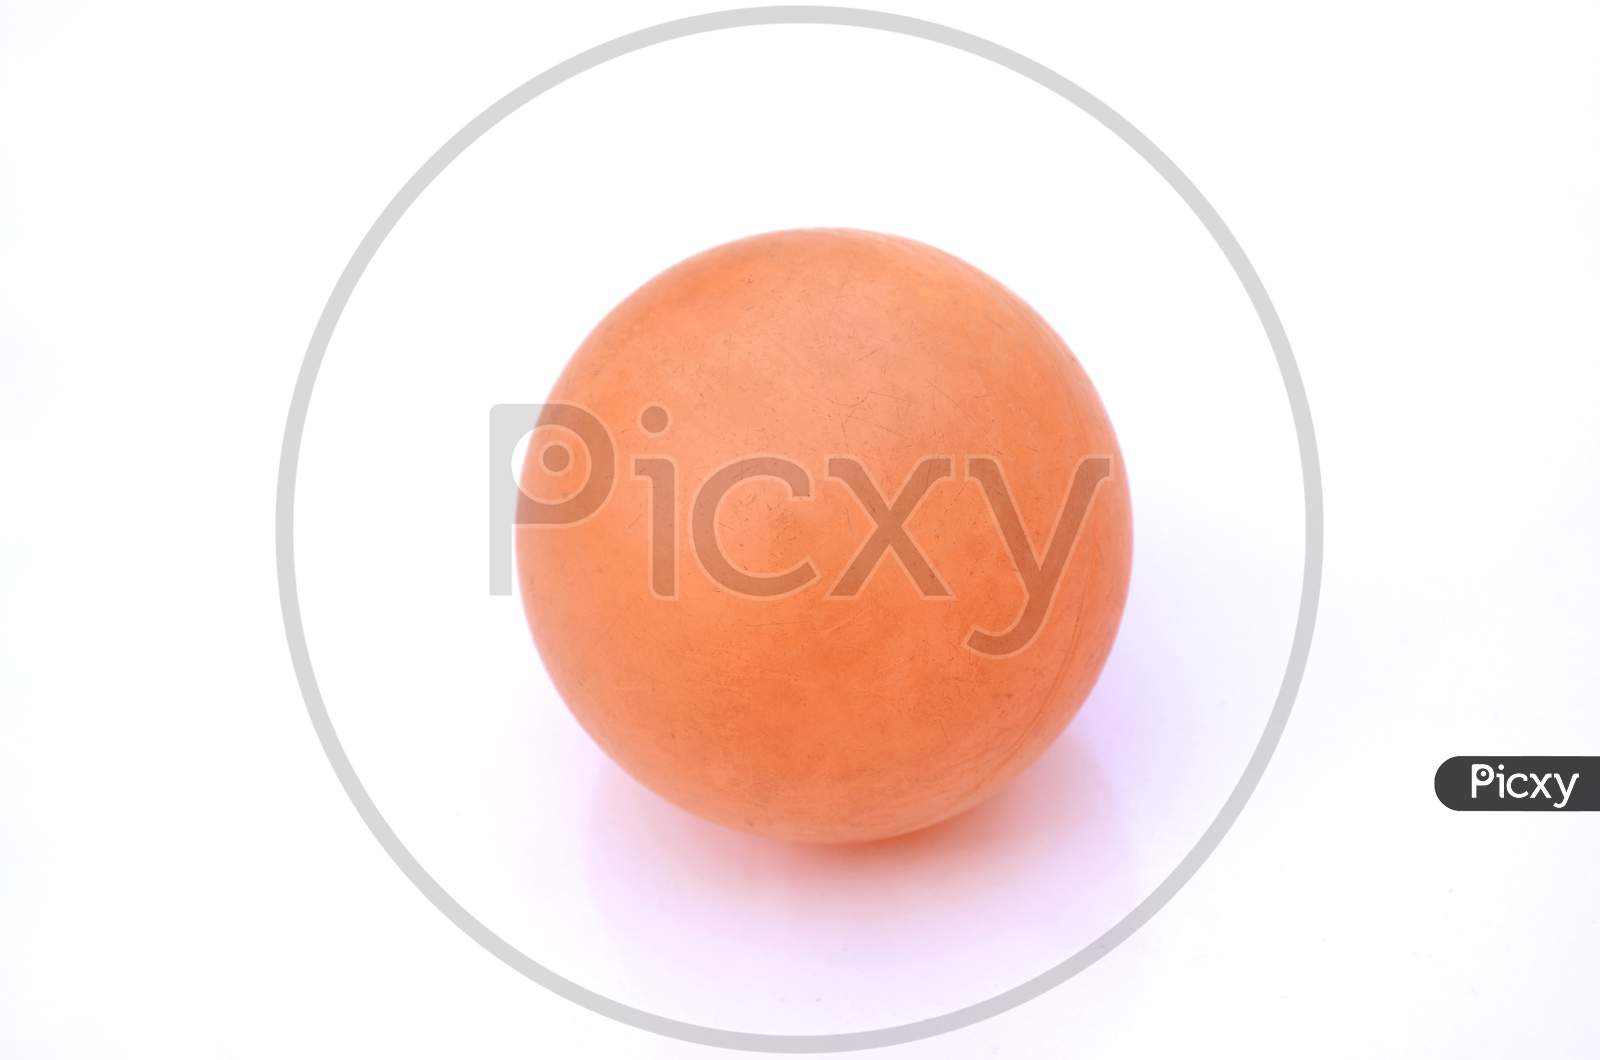 The Orange Color Old Cricket Ball Isolated On White Background.